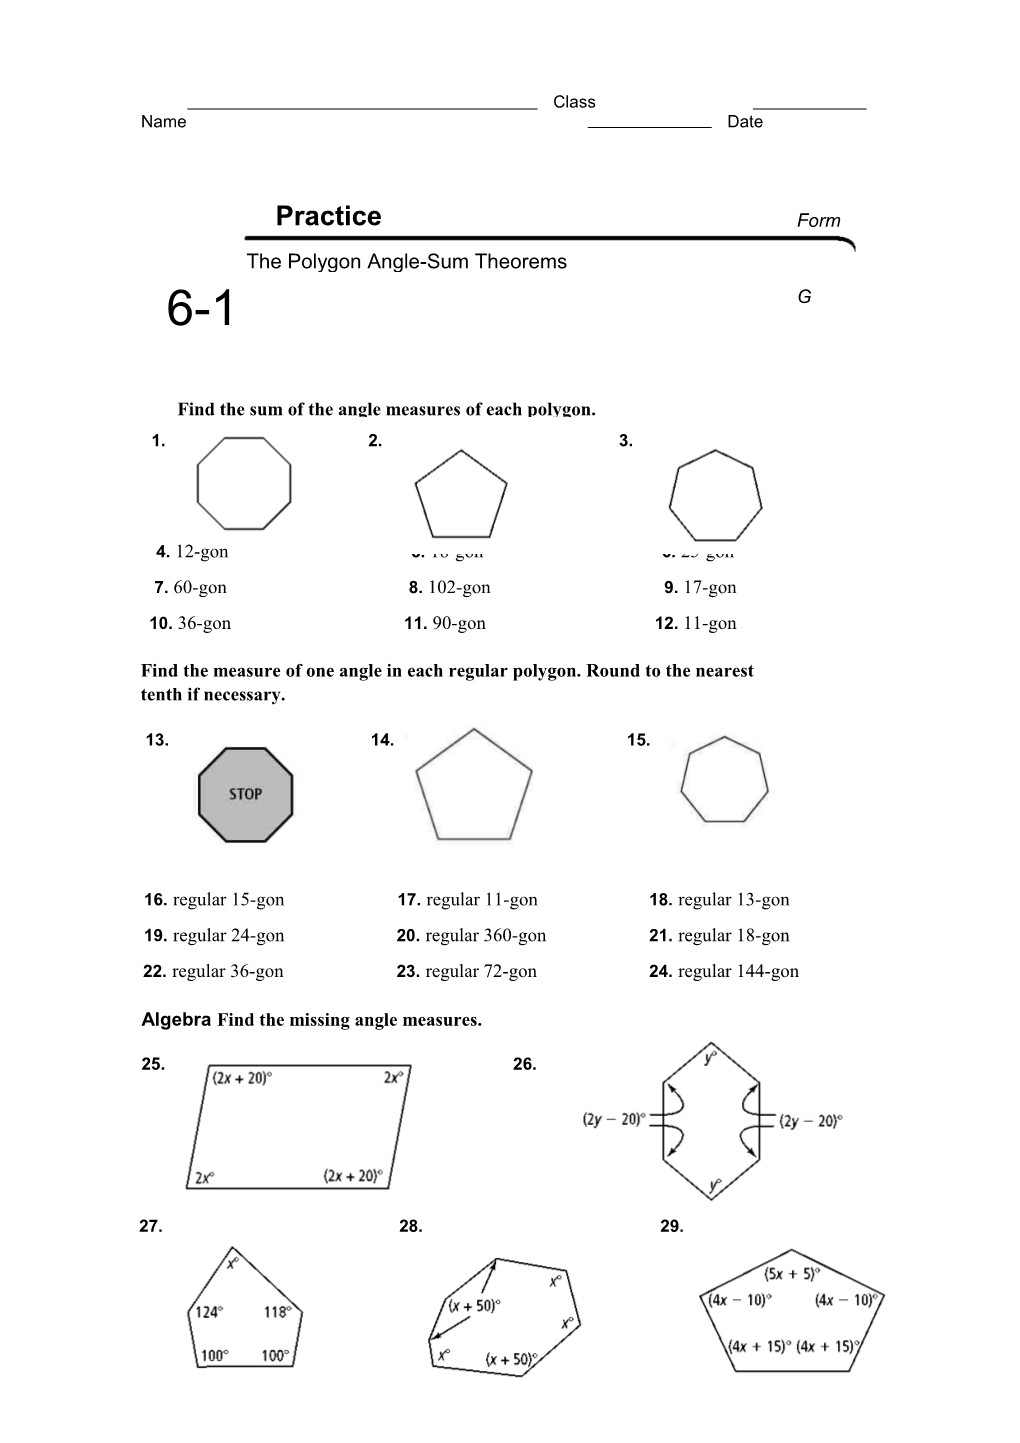 Find the Sum of the Angle Measures of Each Polygon